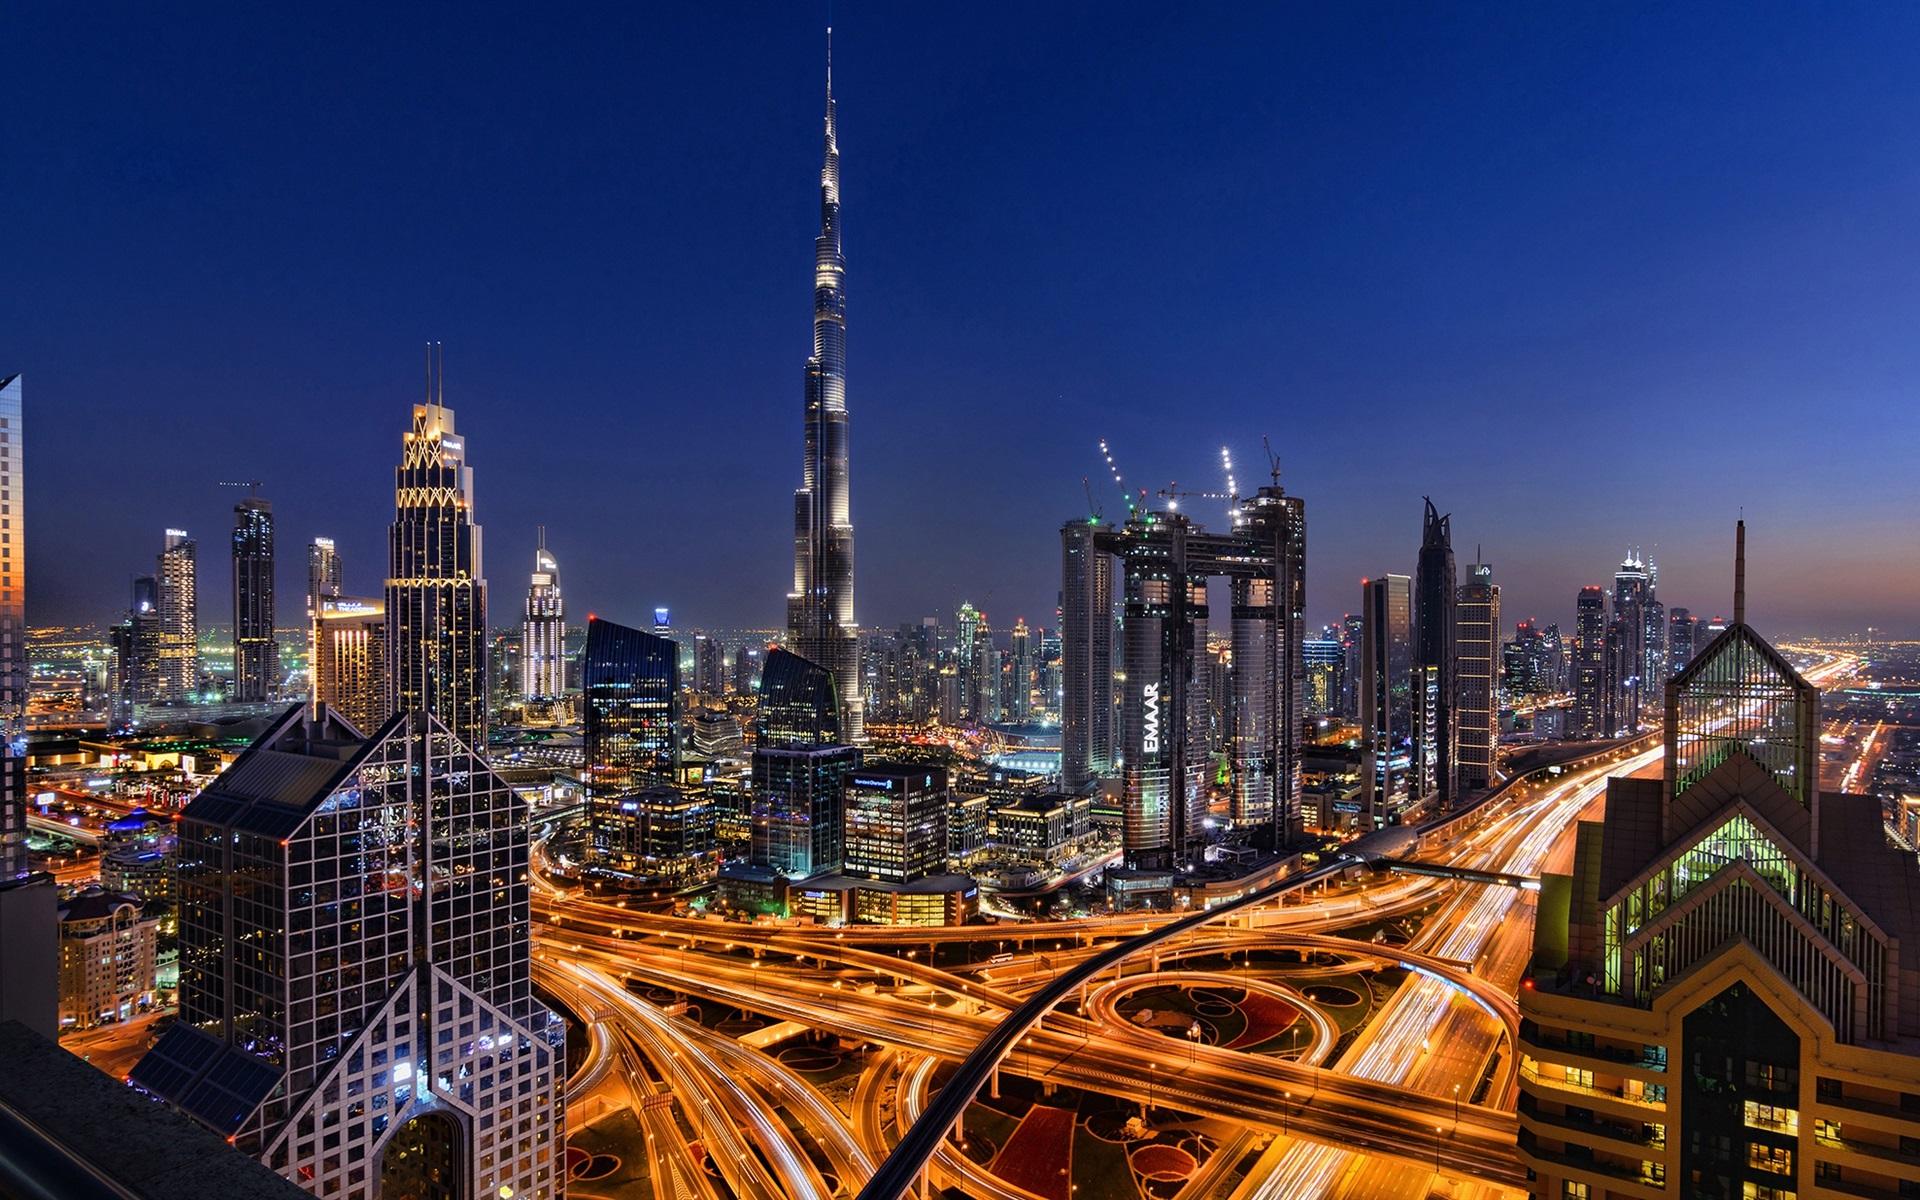 Most Beautiful Places In Dubai